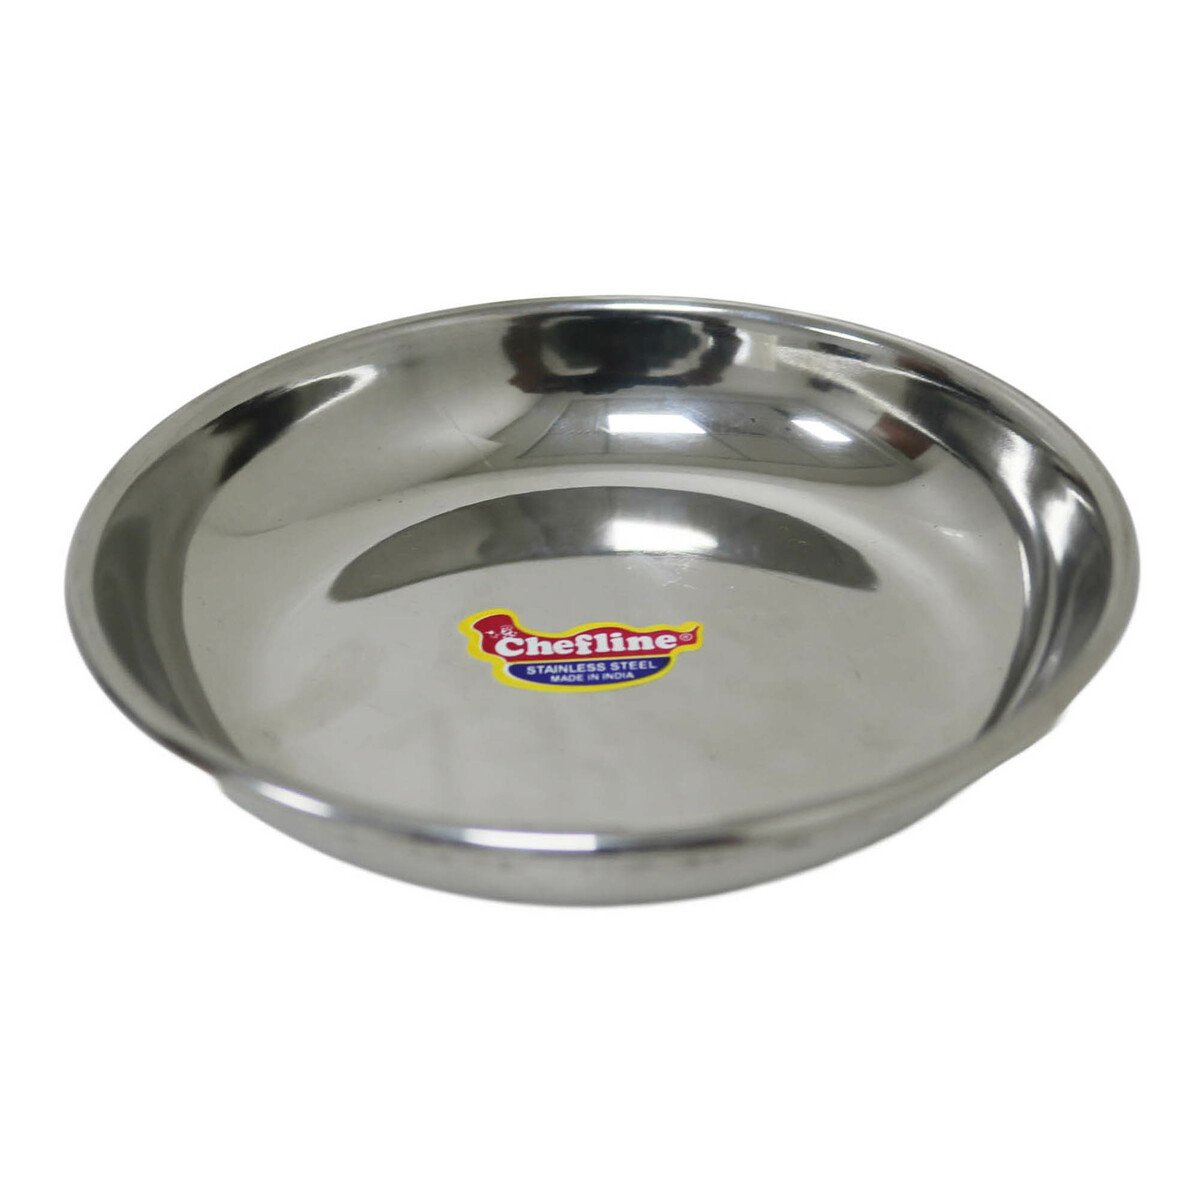 Chefline Stainless Steel Halwa Plate No.6 Ind